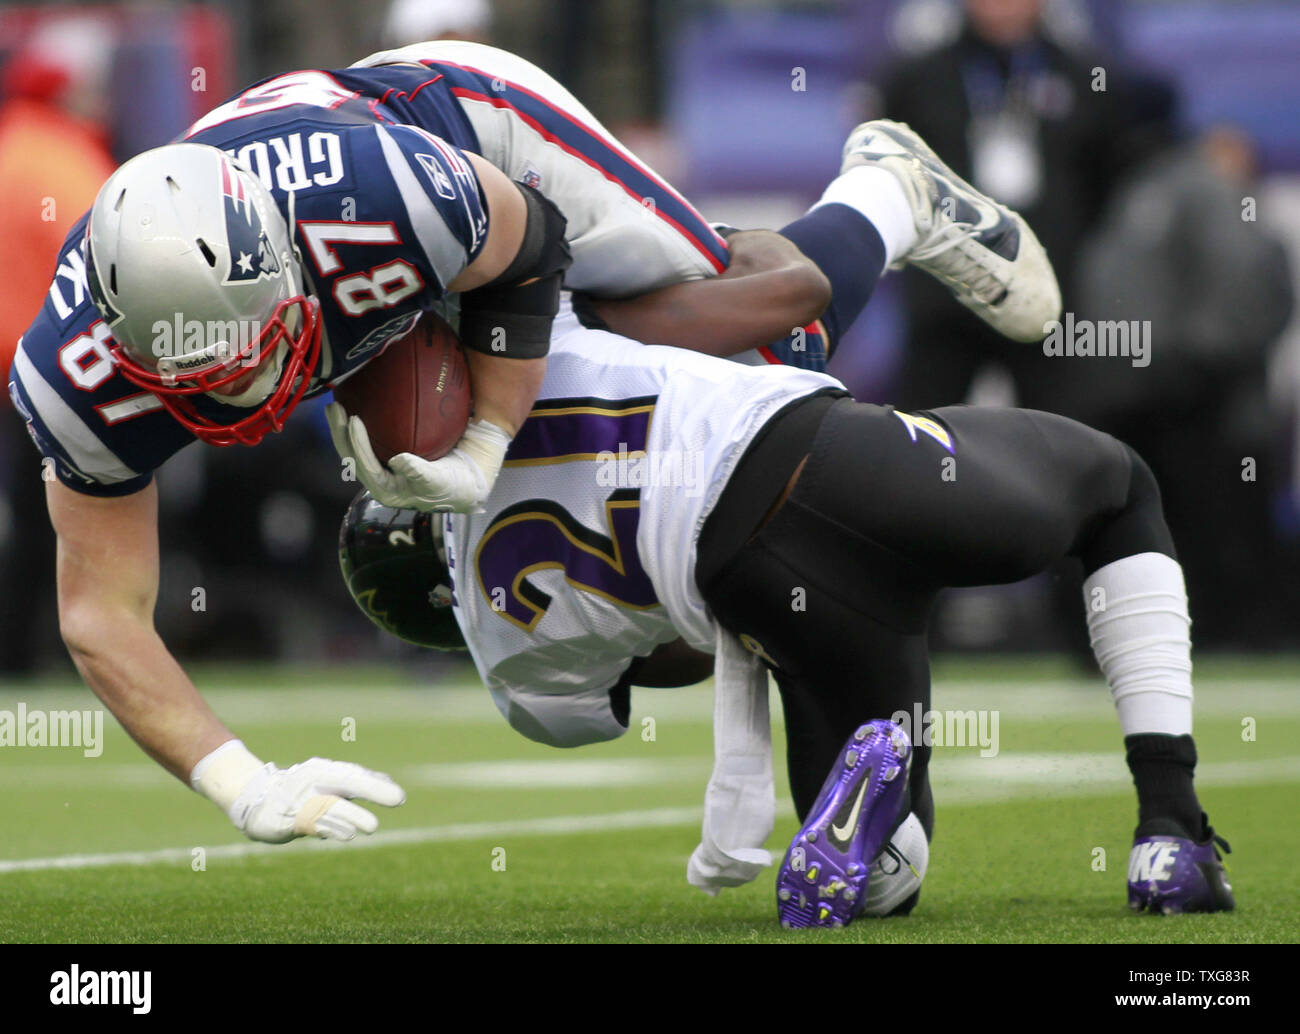 New England Patriots tight end Rob Gronkowski (87) is upended by Baltimore Ravens cornerback Lardarius Webb in on a reception in the first quarter of the AFC Championship game at Gillette Stadium in Foxboro, Massachusetts on January 22, 2012.   UPI/Matthew Healey Stock Photo